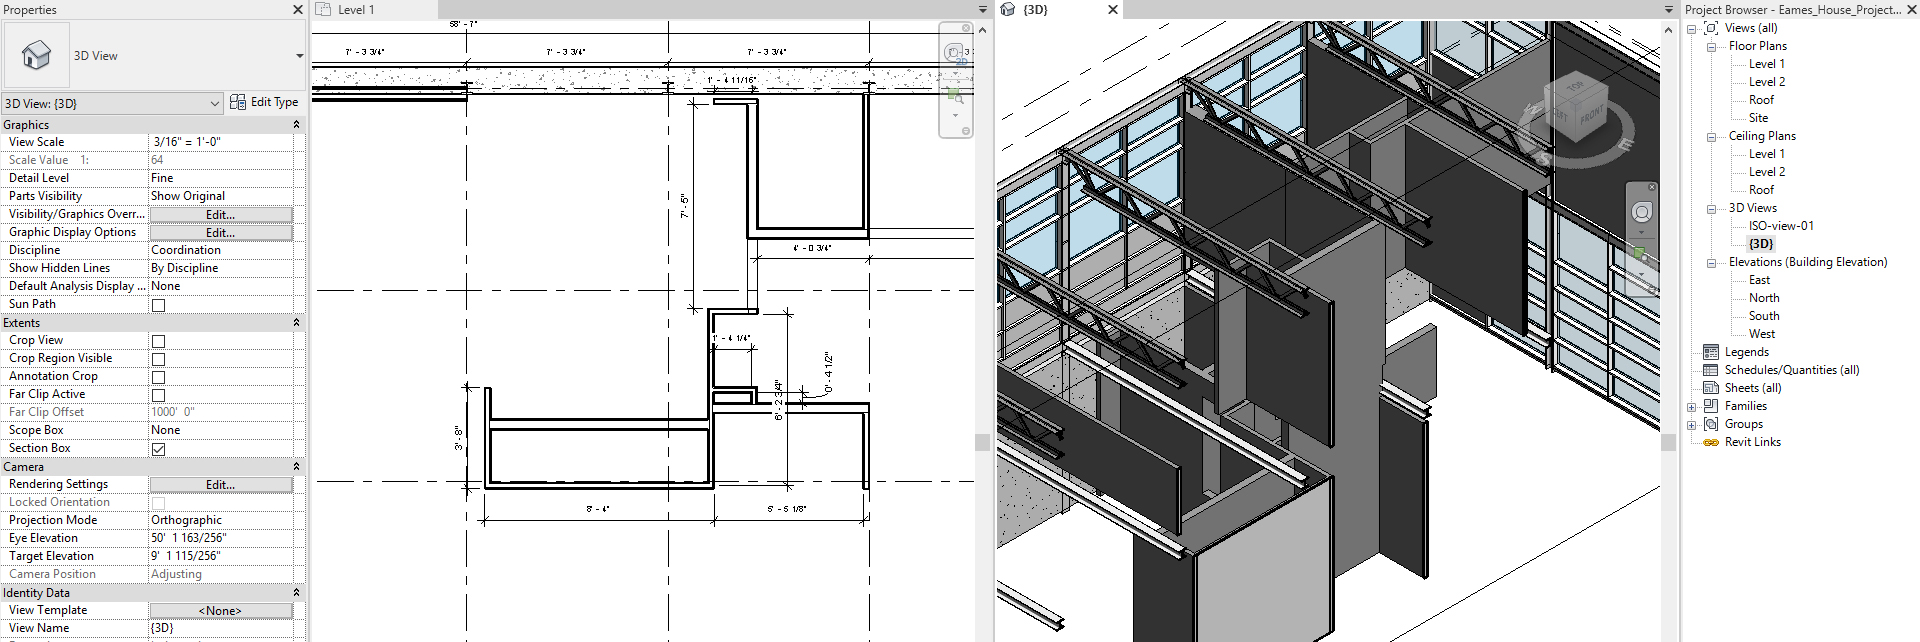 This image shows the floor plan view and the 3D view.